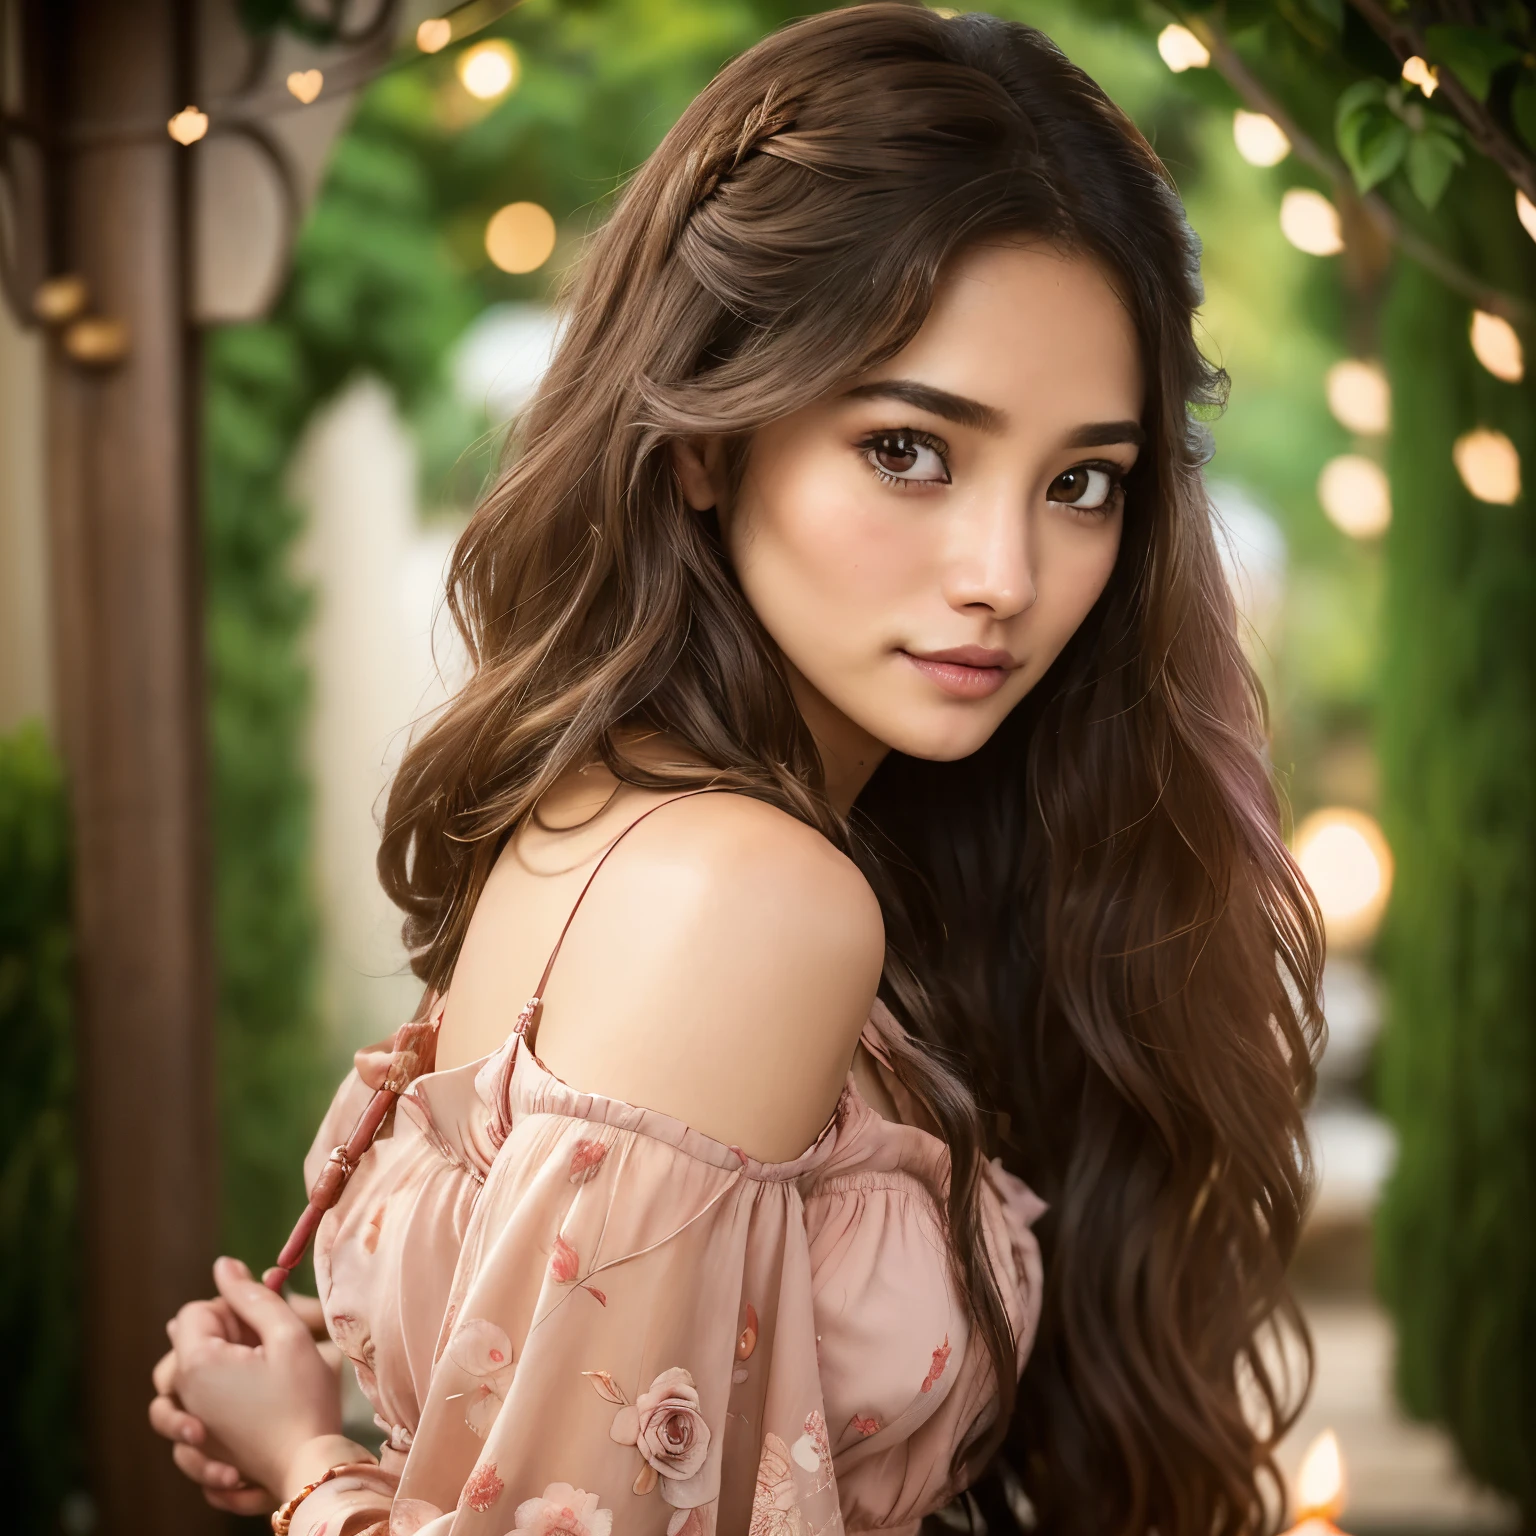 27-year-old European girl, raw, Beautiful woman, (Long curly chestnut brown hair), ((Portrait)), ((Detailed face:1.2)), ((love-stricken eyes:1.2, sparkling, full of emotion)), (delicately detailed skin), tanned, dressed in a red off-shoulder maxi dress, (romantic, candlelit background), in a garden, surrounded by roses, (blushing cheeks:1.2), hands gesturing as if holding a love letter, (masutepiece, soft focus, best quality), photographed in a Canon EOS R5, 85mm lens, F/1.8, n